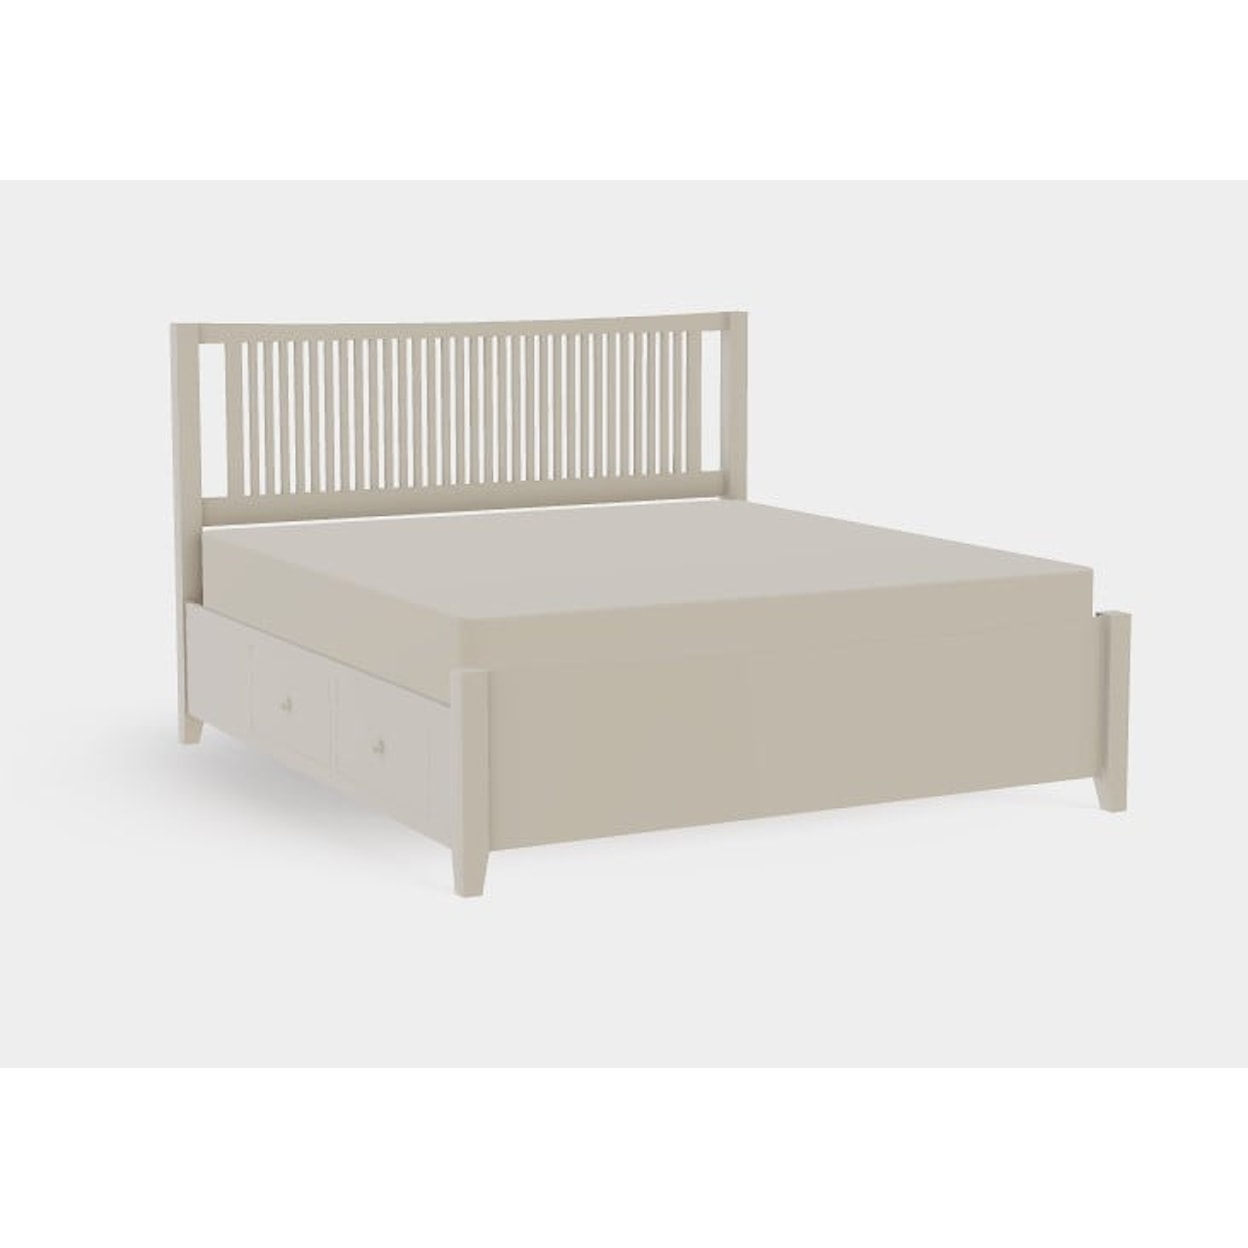 Mavin Atwood Group Atwood King Both Drawerside Spindle Bed